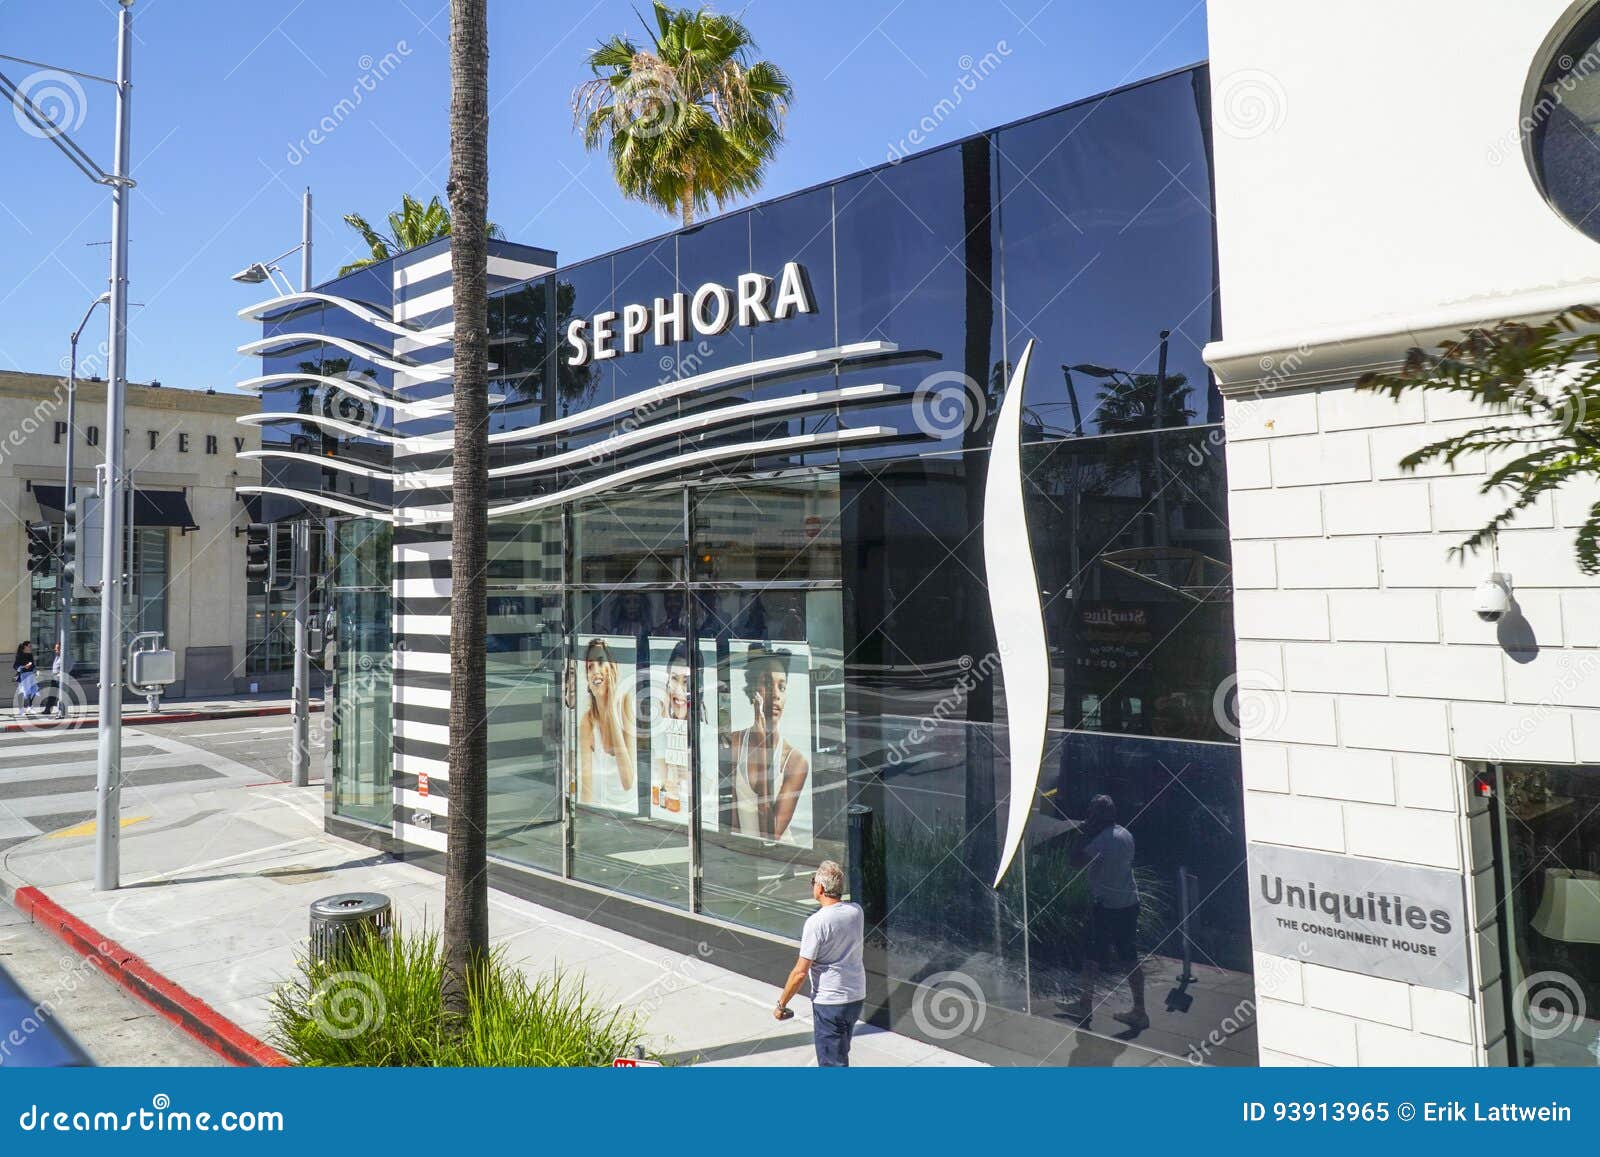 Sephora in Beverly Hills - LOS ANGELES - CALIFORNIA - APRIL 20